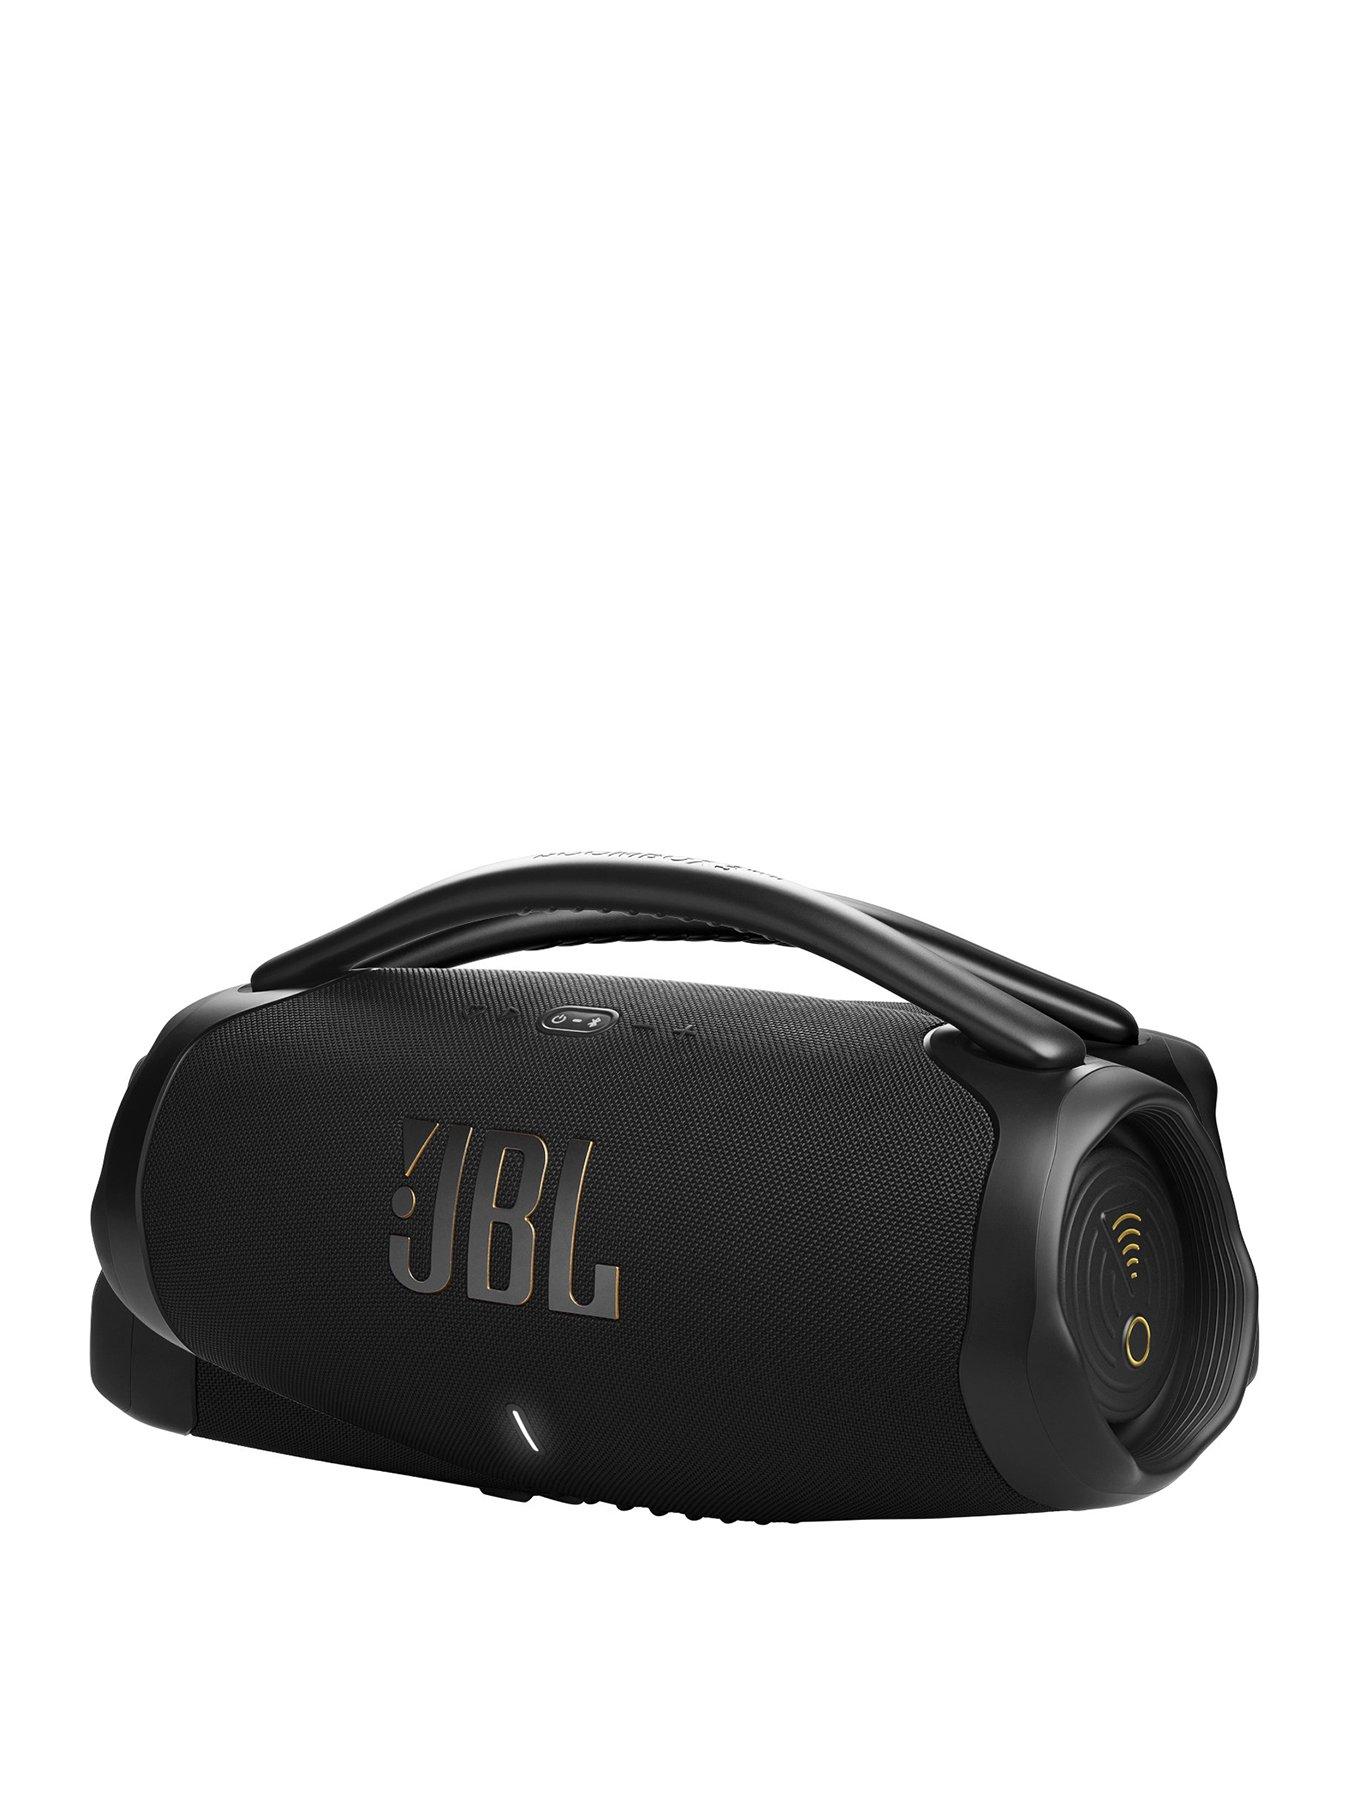 JBL Boombox3 WiFi, Portable speaker with Wi-Fi and Bluetooth, IP67